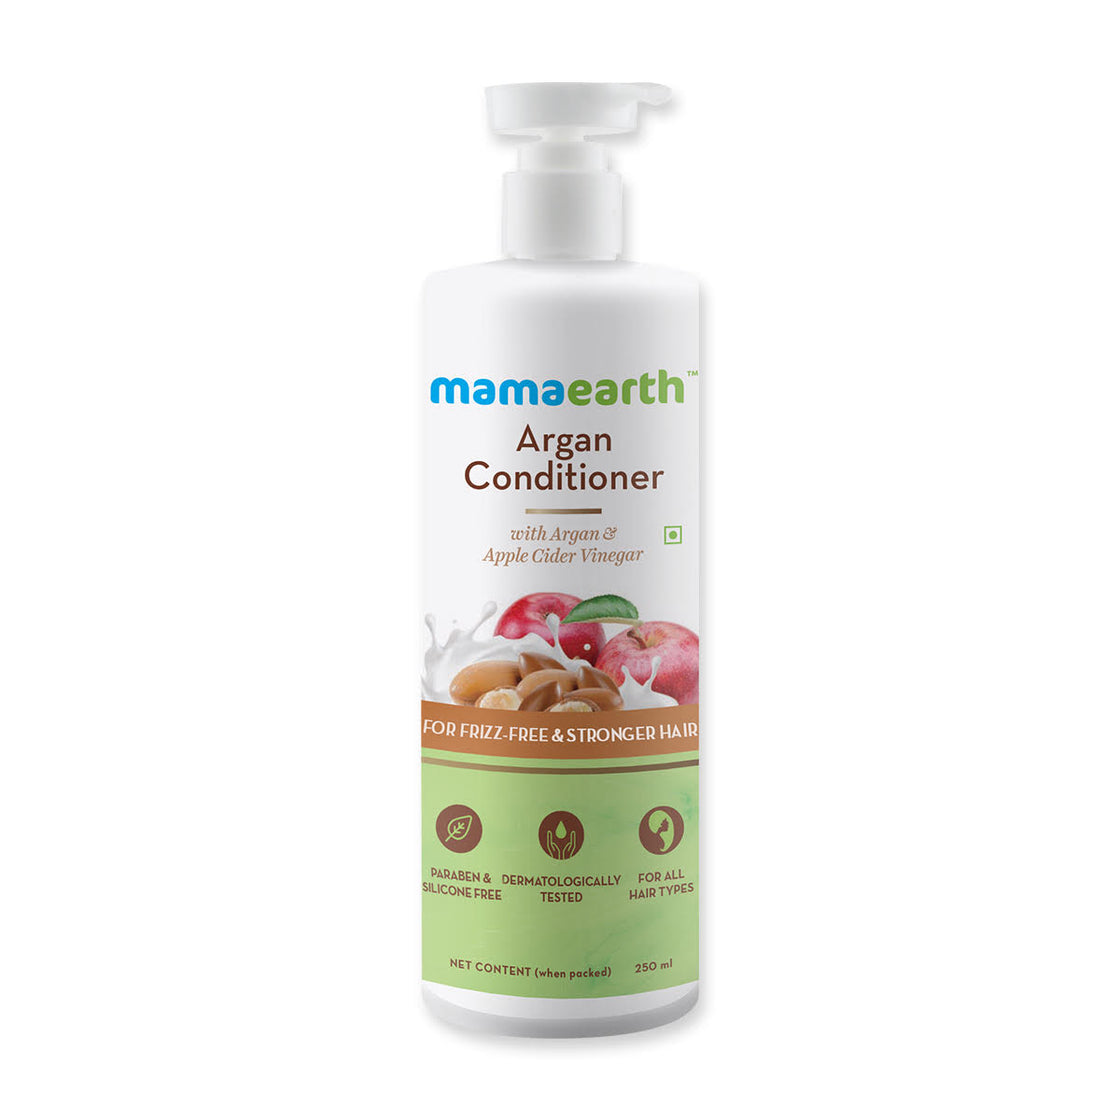 Mamaearth Argan & Apple Cider Vinegar Conditioner For Dry & Frizzy Hair